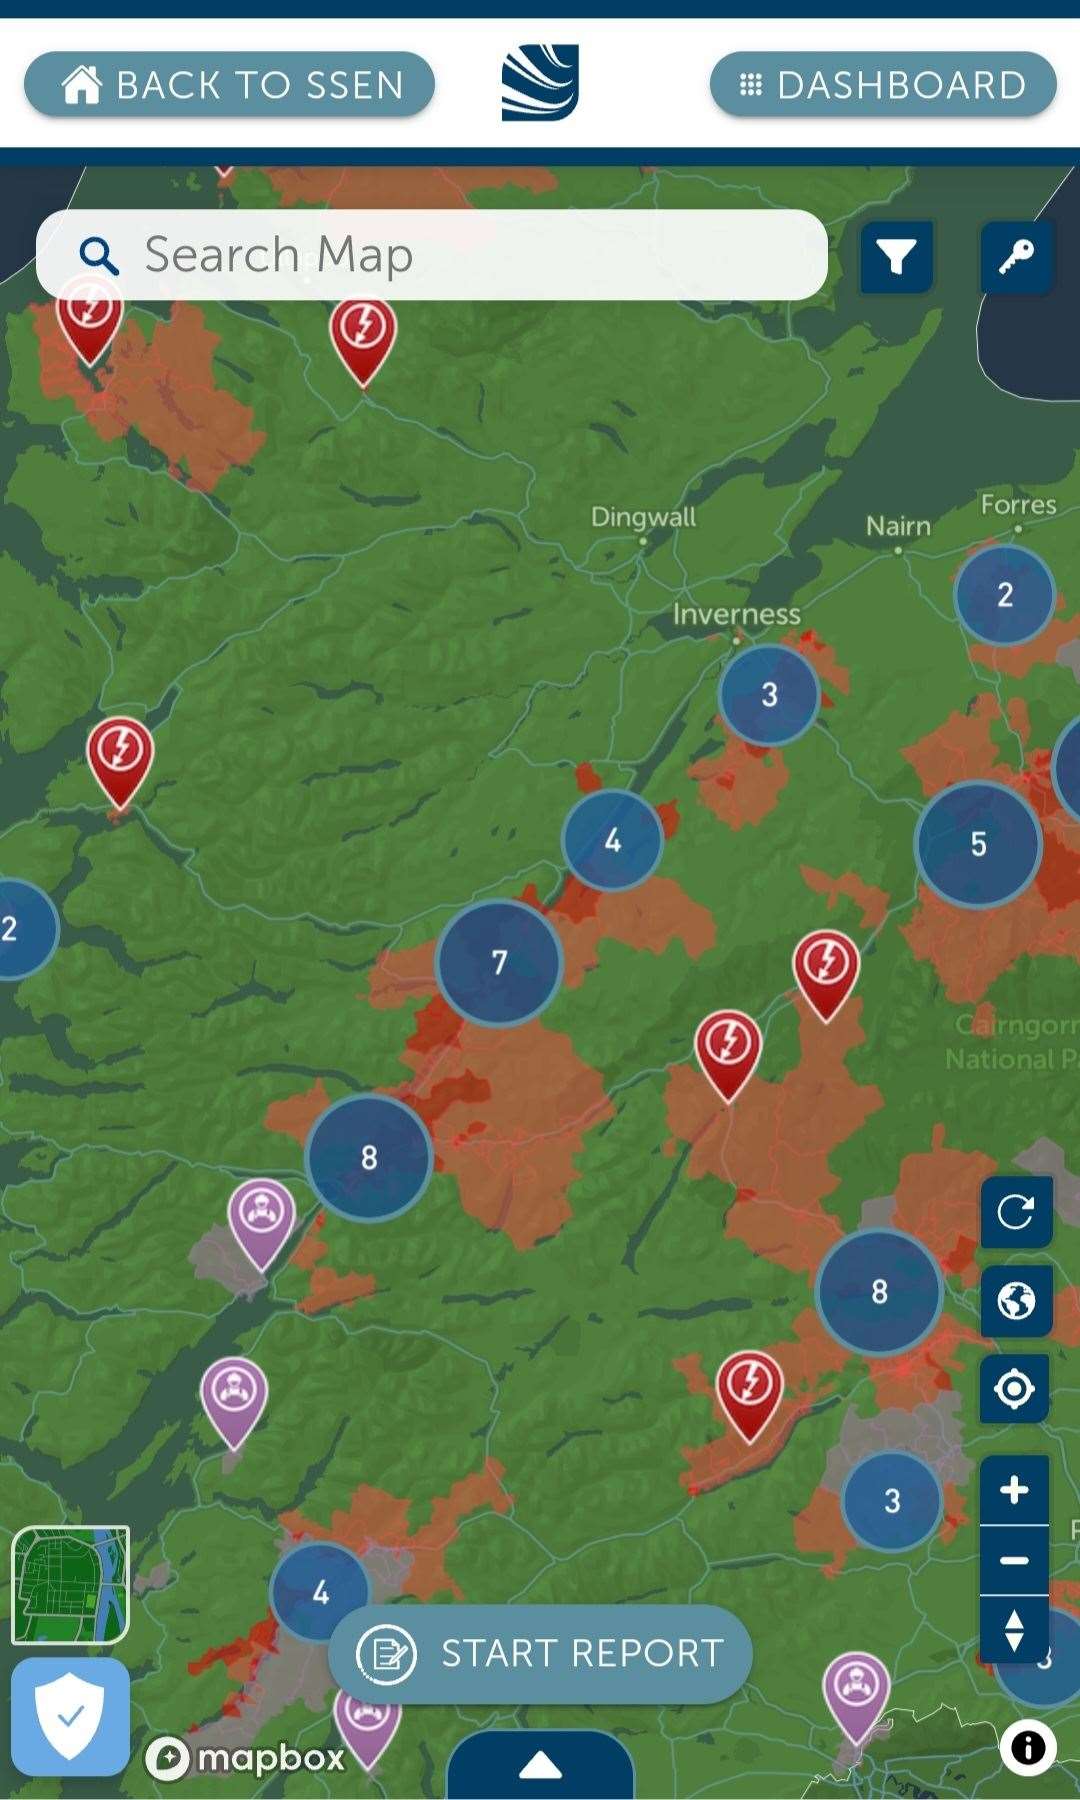 Map of (red) power outages showing scale of task facing SSEN engineers amid Storm Gerrit